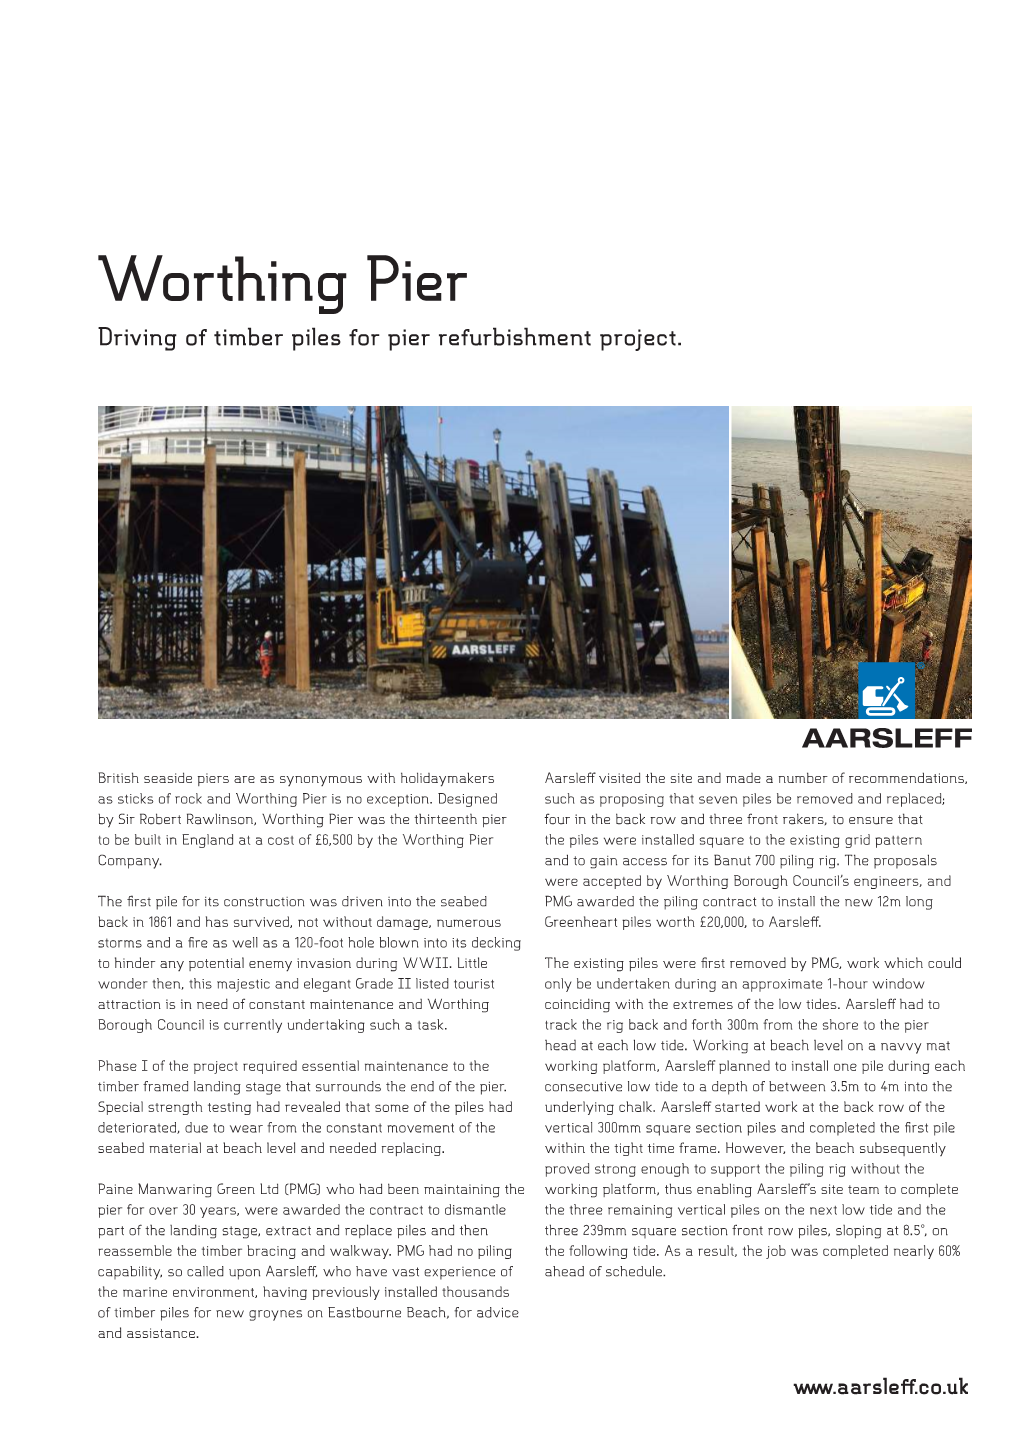 Worthing Pier Driving of Timber Piles for Pier Refurbishment Project